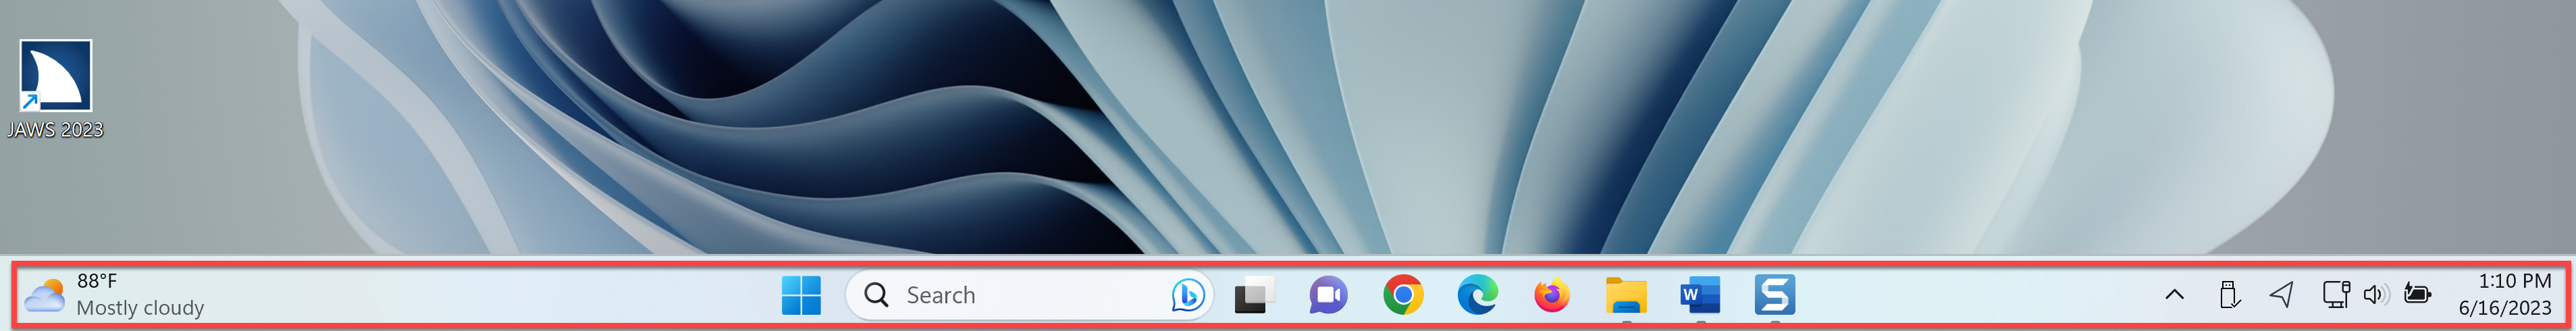 The Taskbar in Windows 11 covers the entire bottom row of the screen.